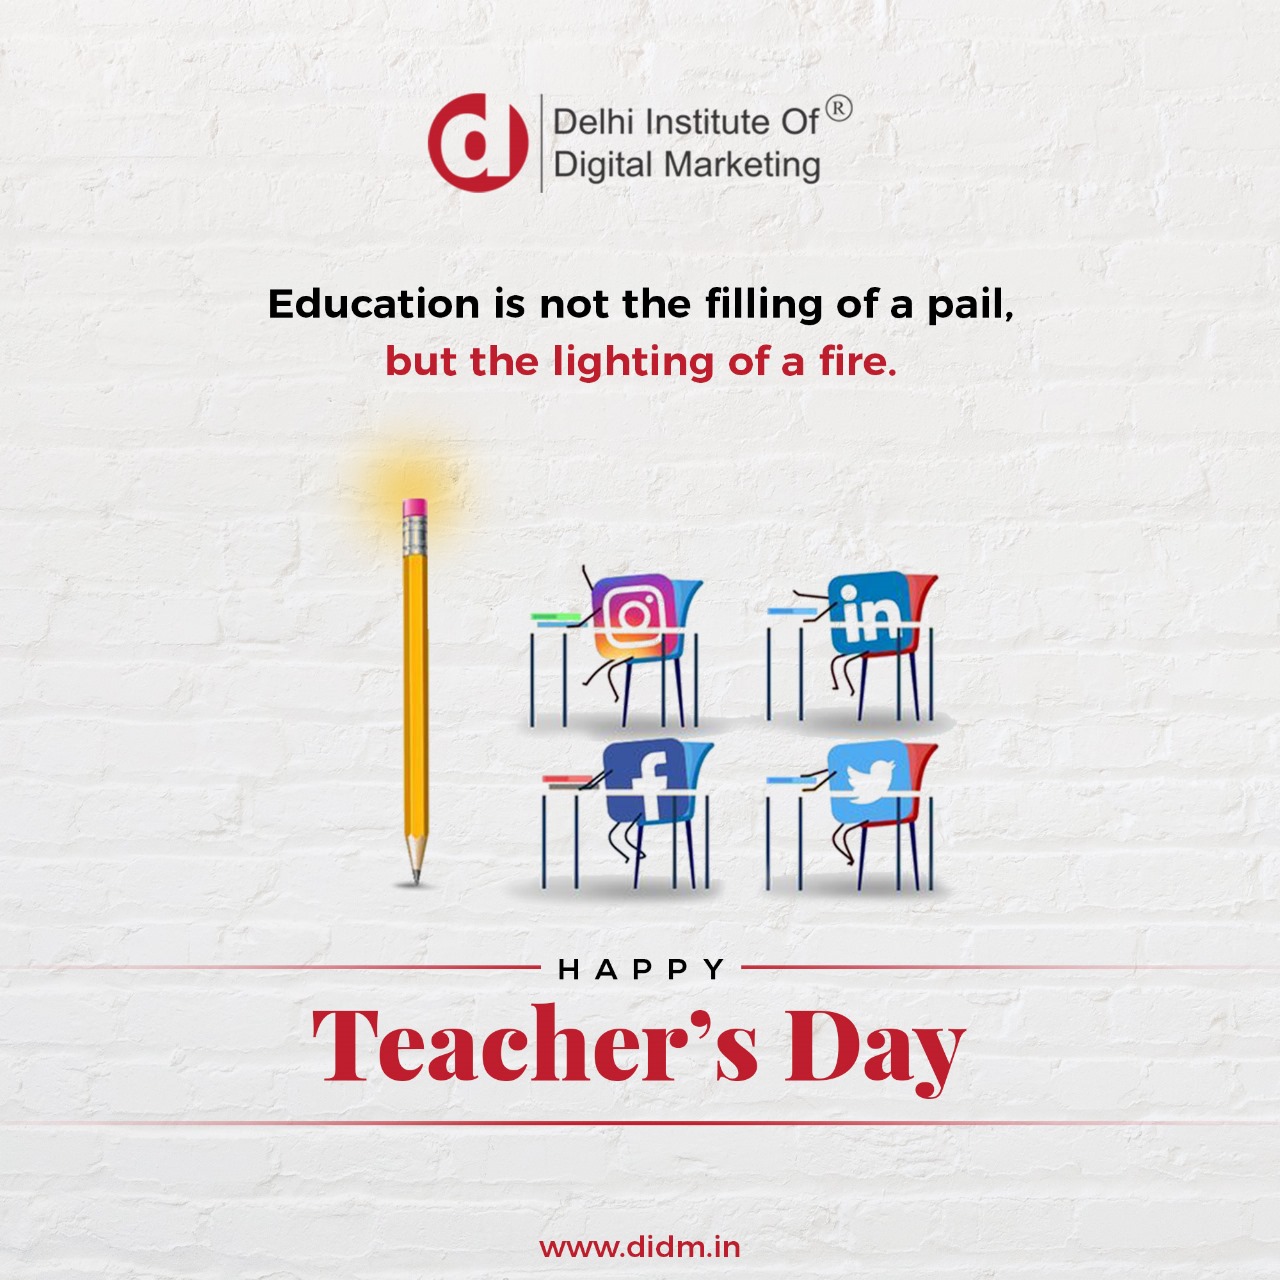 Team DIDM Wishes You A Very Happy Teacher’s Day